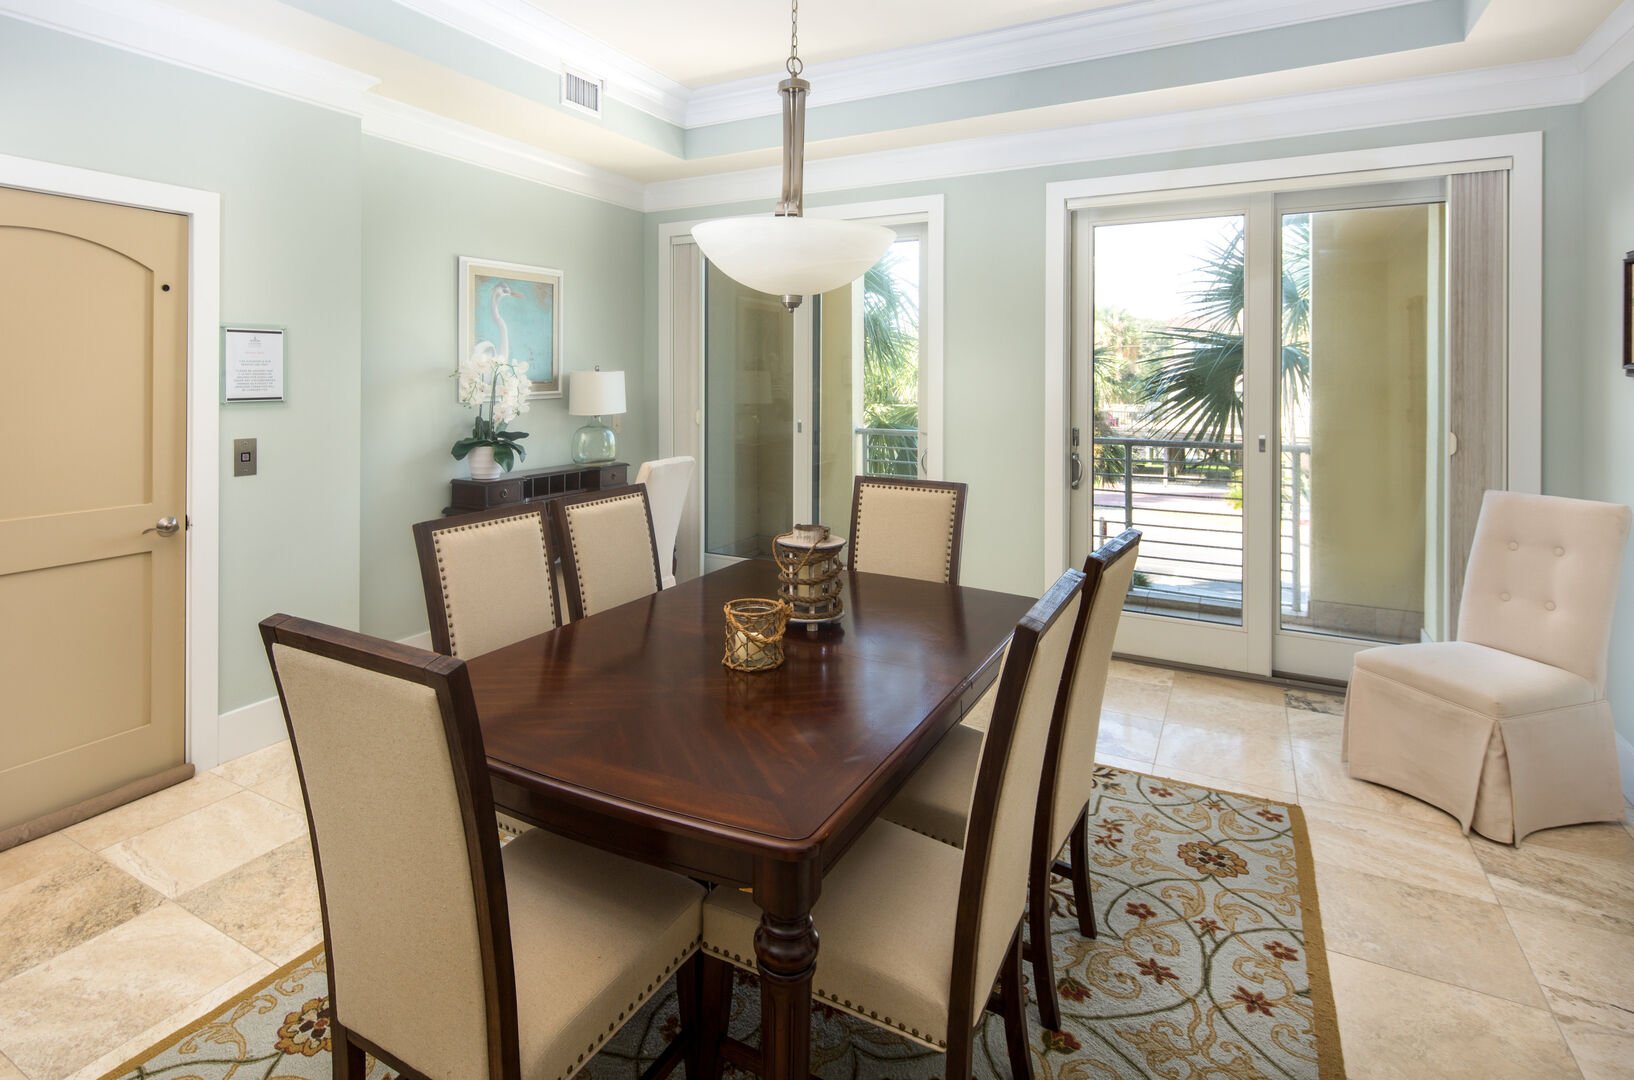 Formal dining space to accommodate your guests!